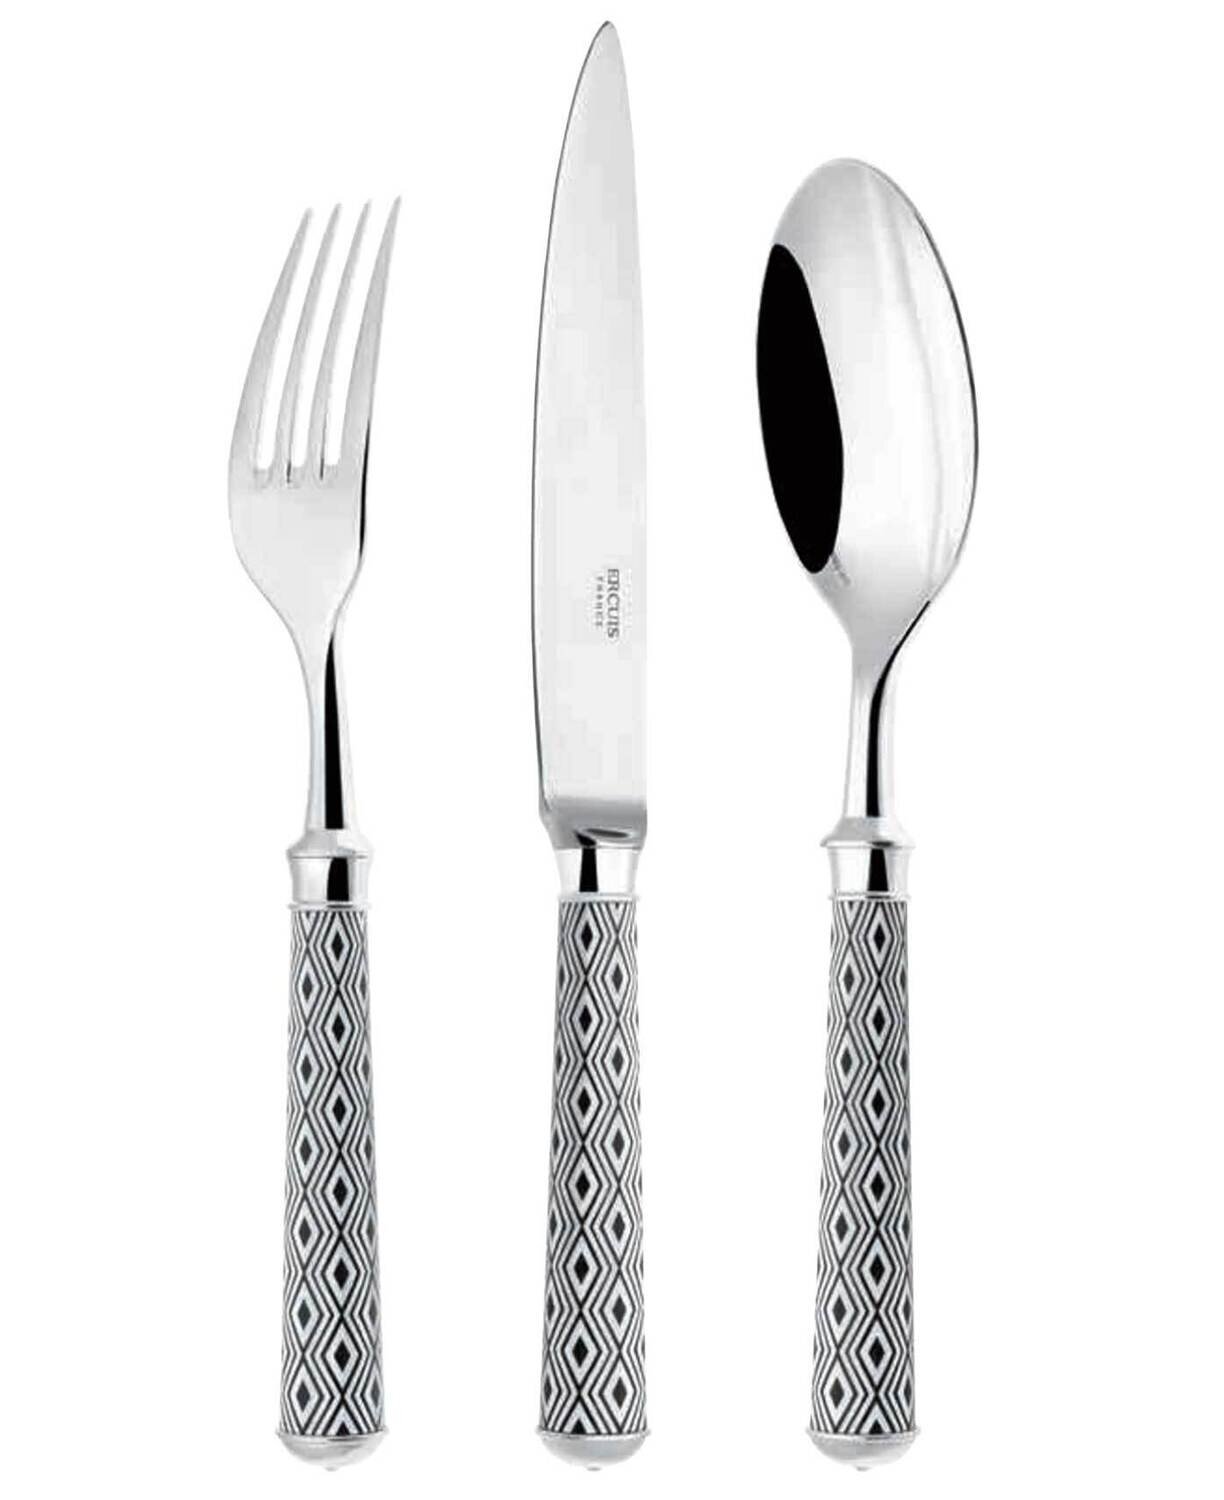 Ercuis Arlequin Brown Grey Cake Server Sharp 9.5 Inch Silver Plated F600546-52